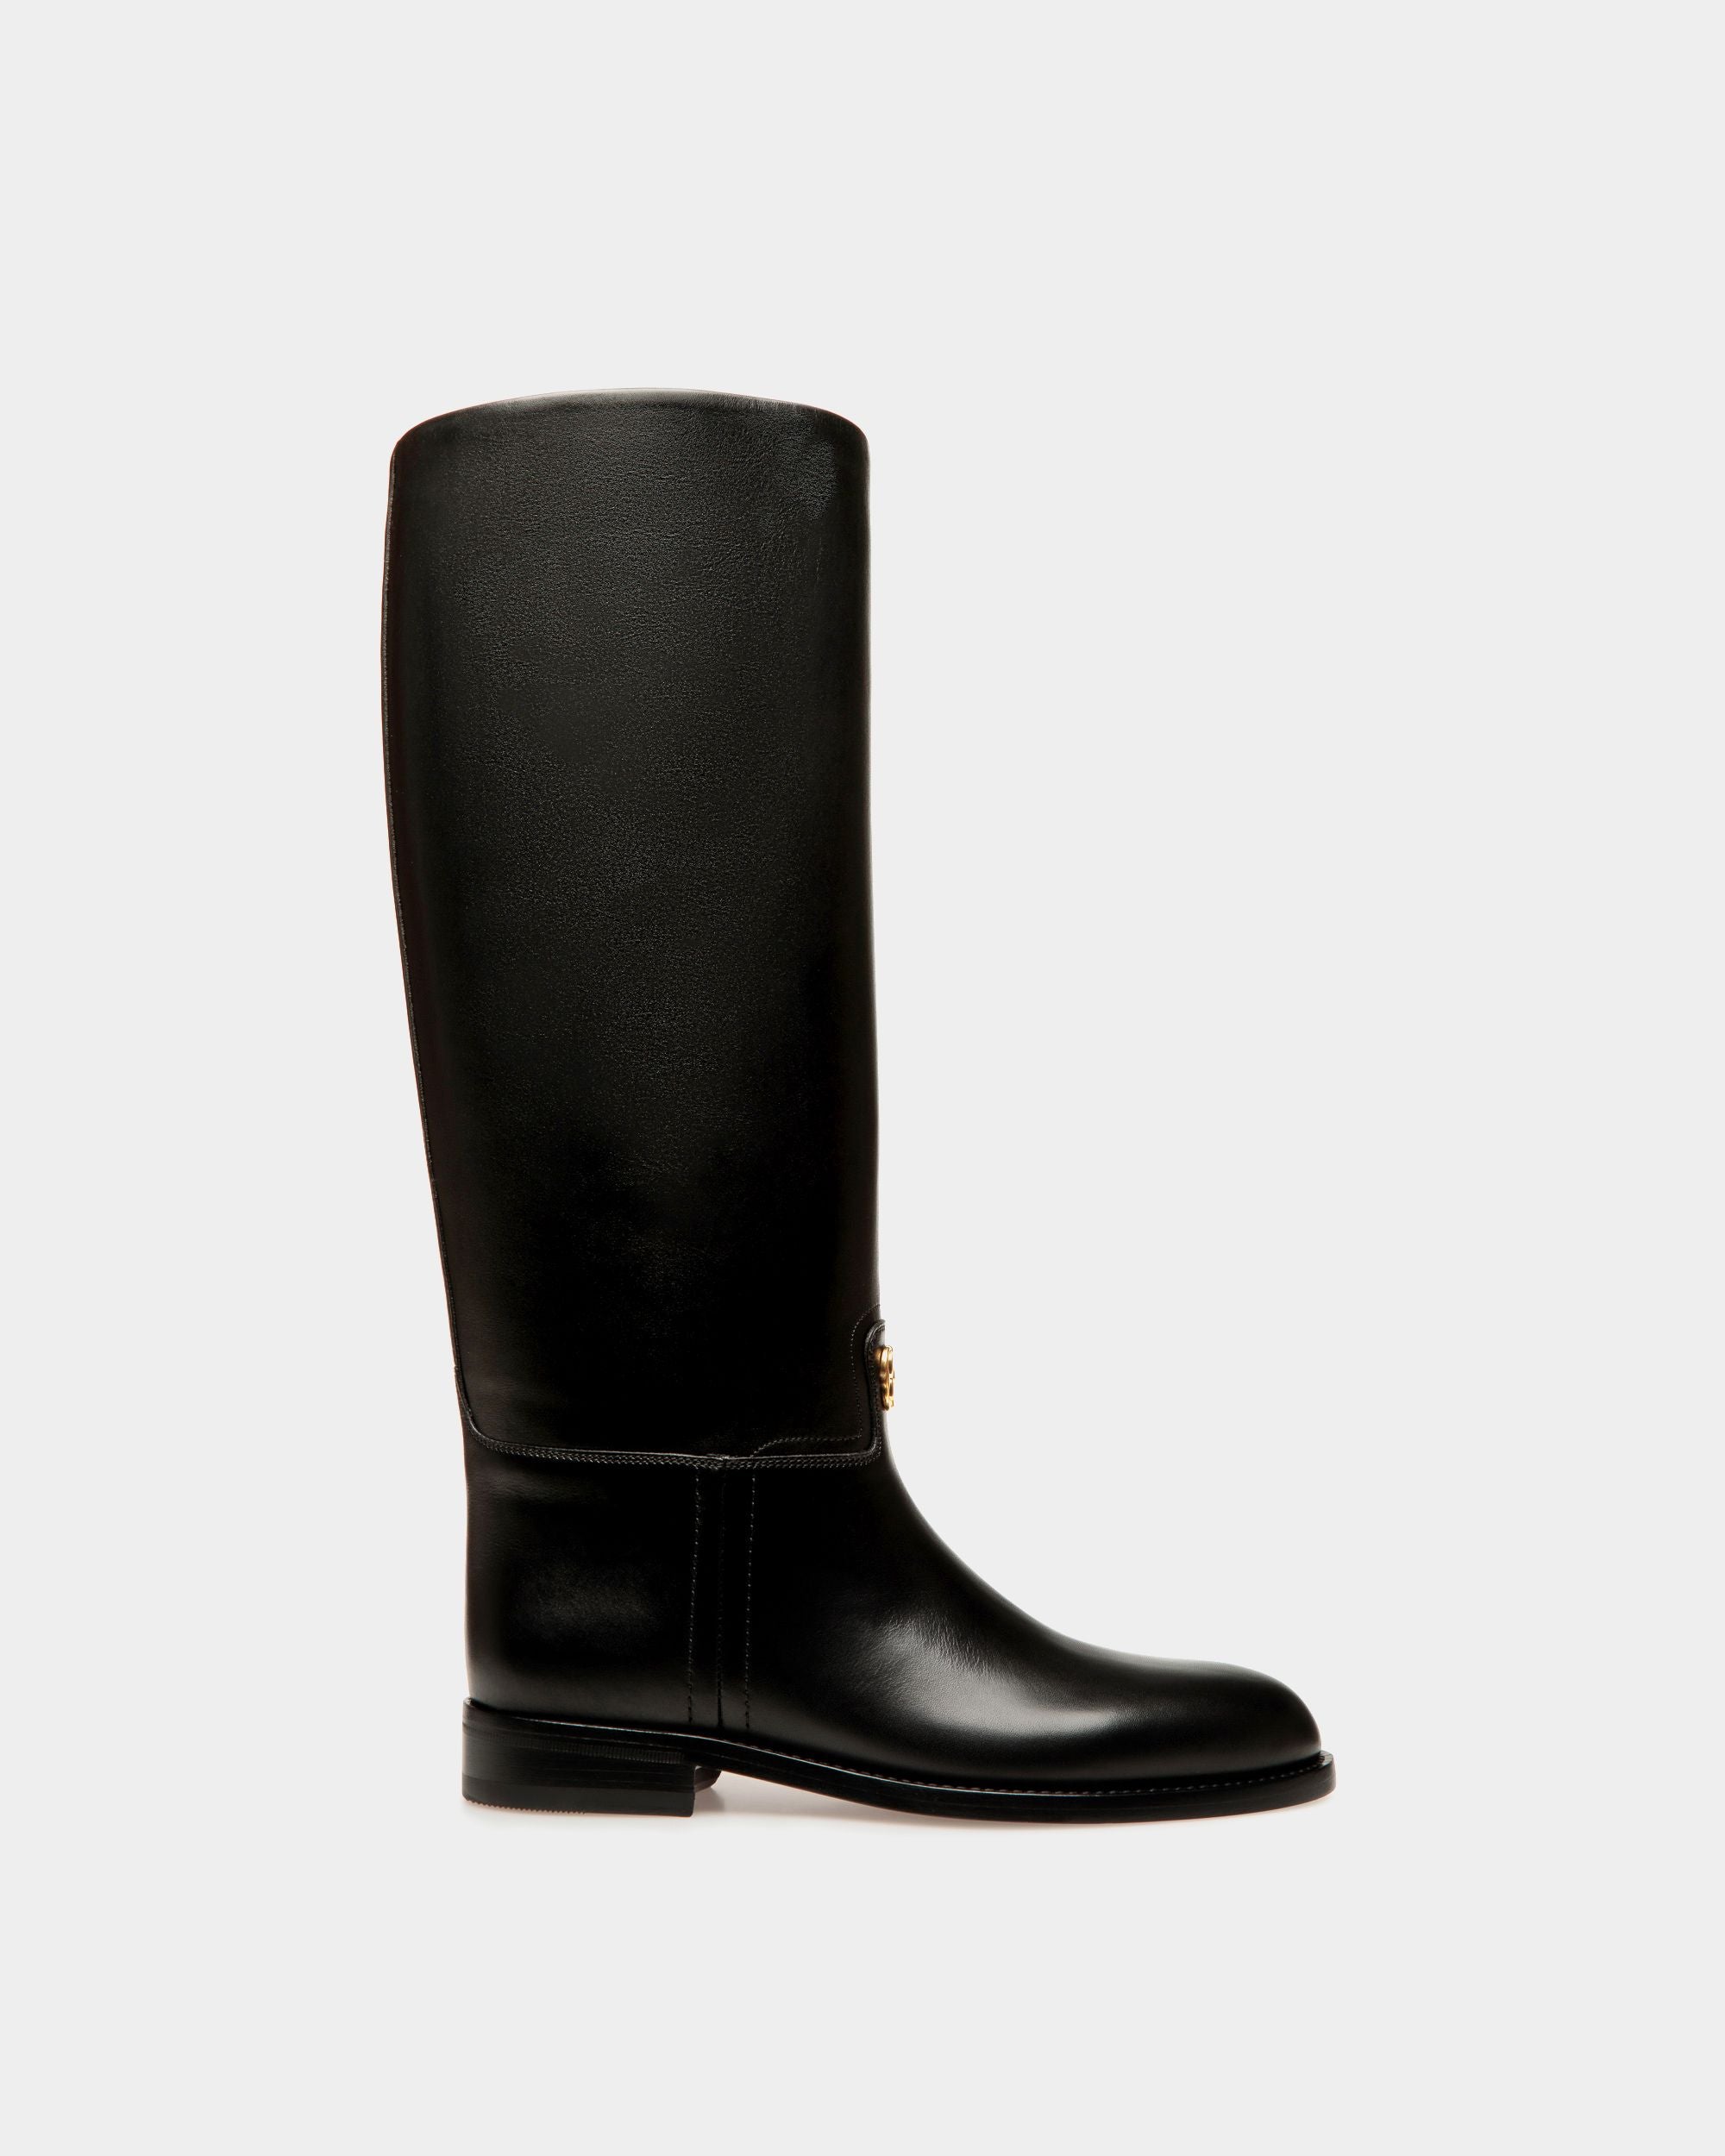 Hollie | Women's Long Boots | Black Leather | Bally | Still Life Side